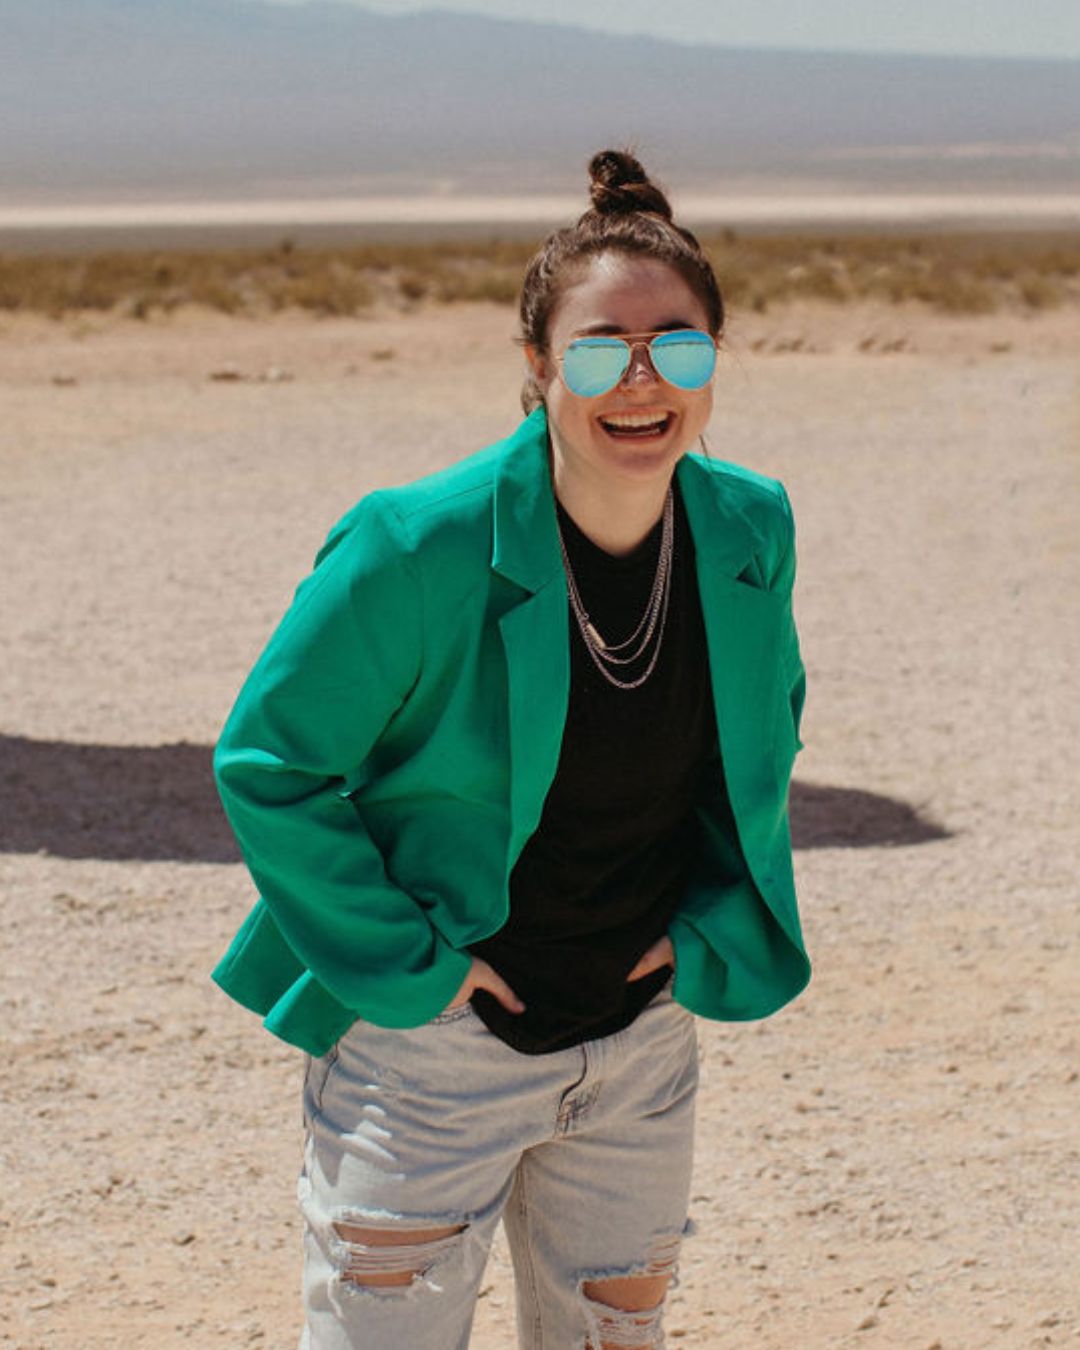 Woman in a green blazer smiling with sunglasses in the desert.